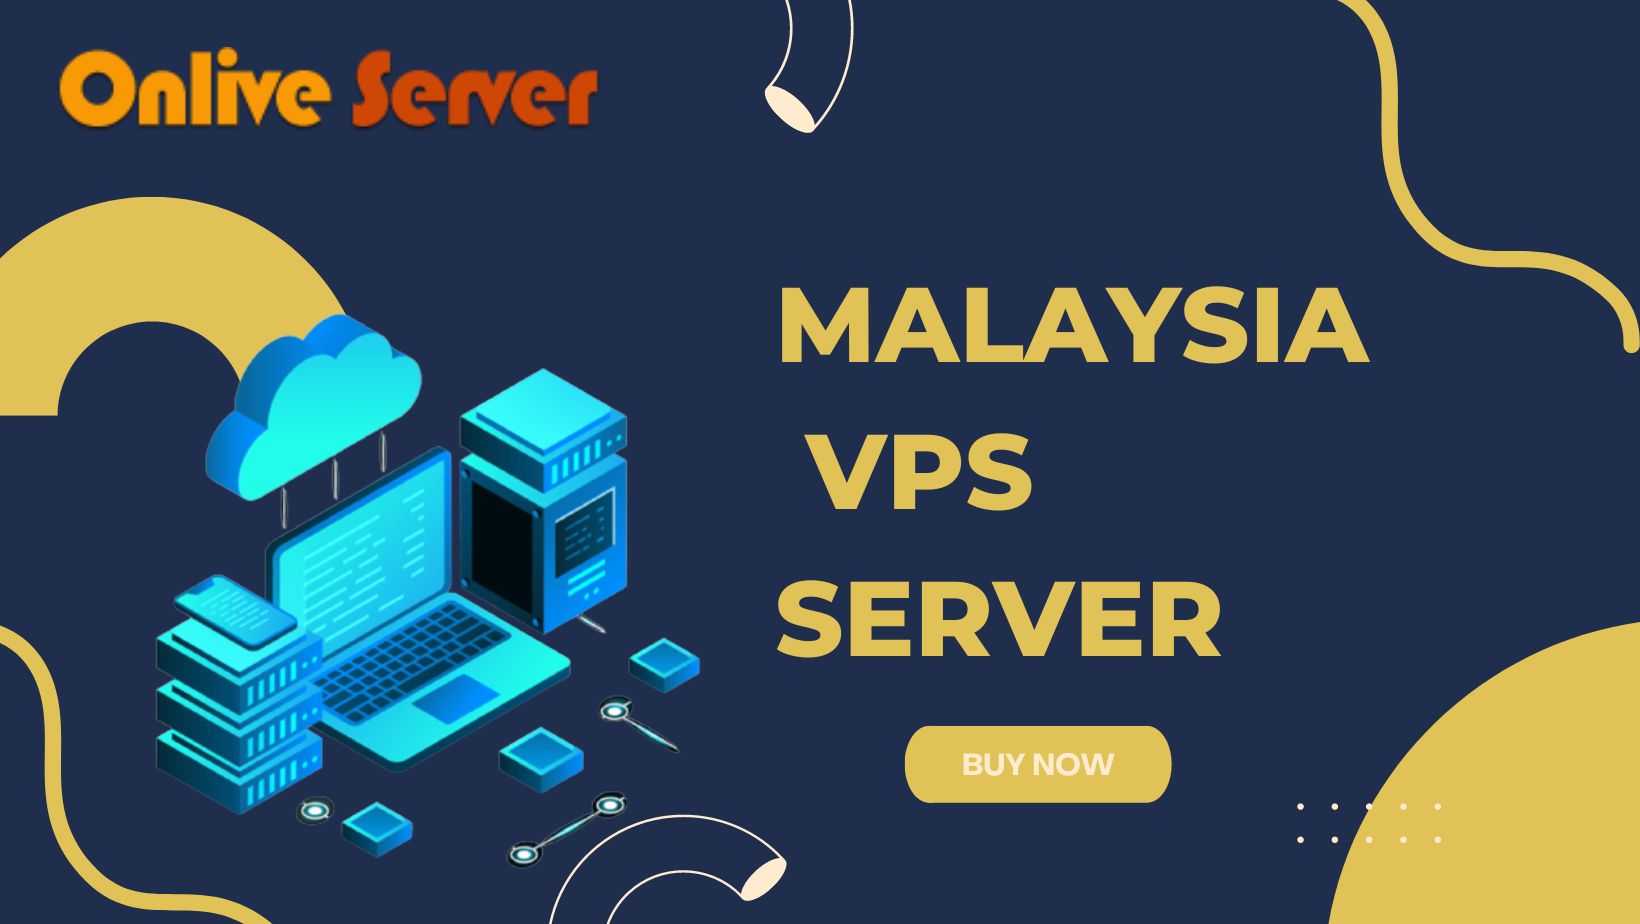 Malaysia VPS Server with Fully Technical Support – Onlive Server